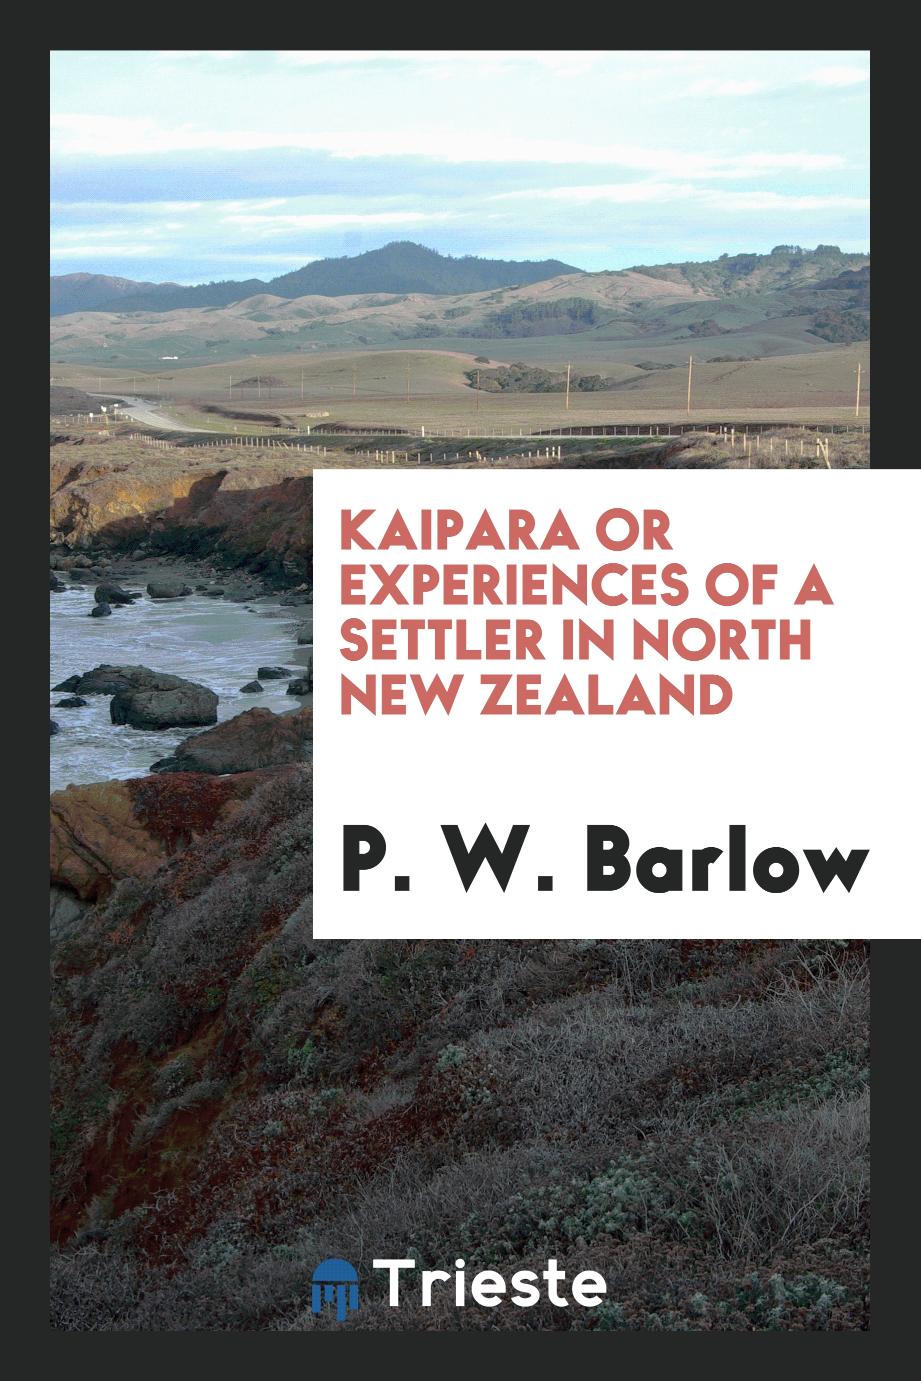 P. W. Barlow - Kaipara or Experiences of a settler in North New Zealand